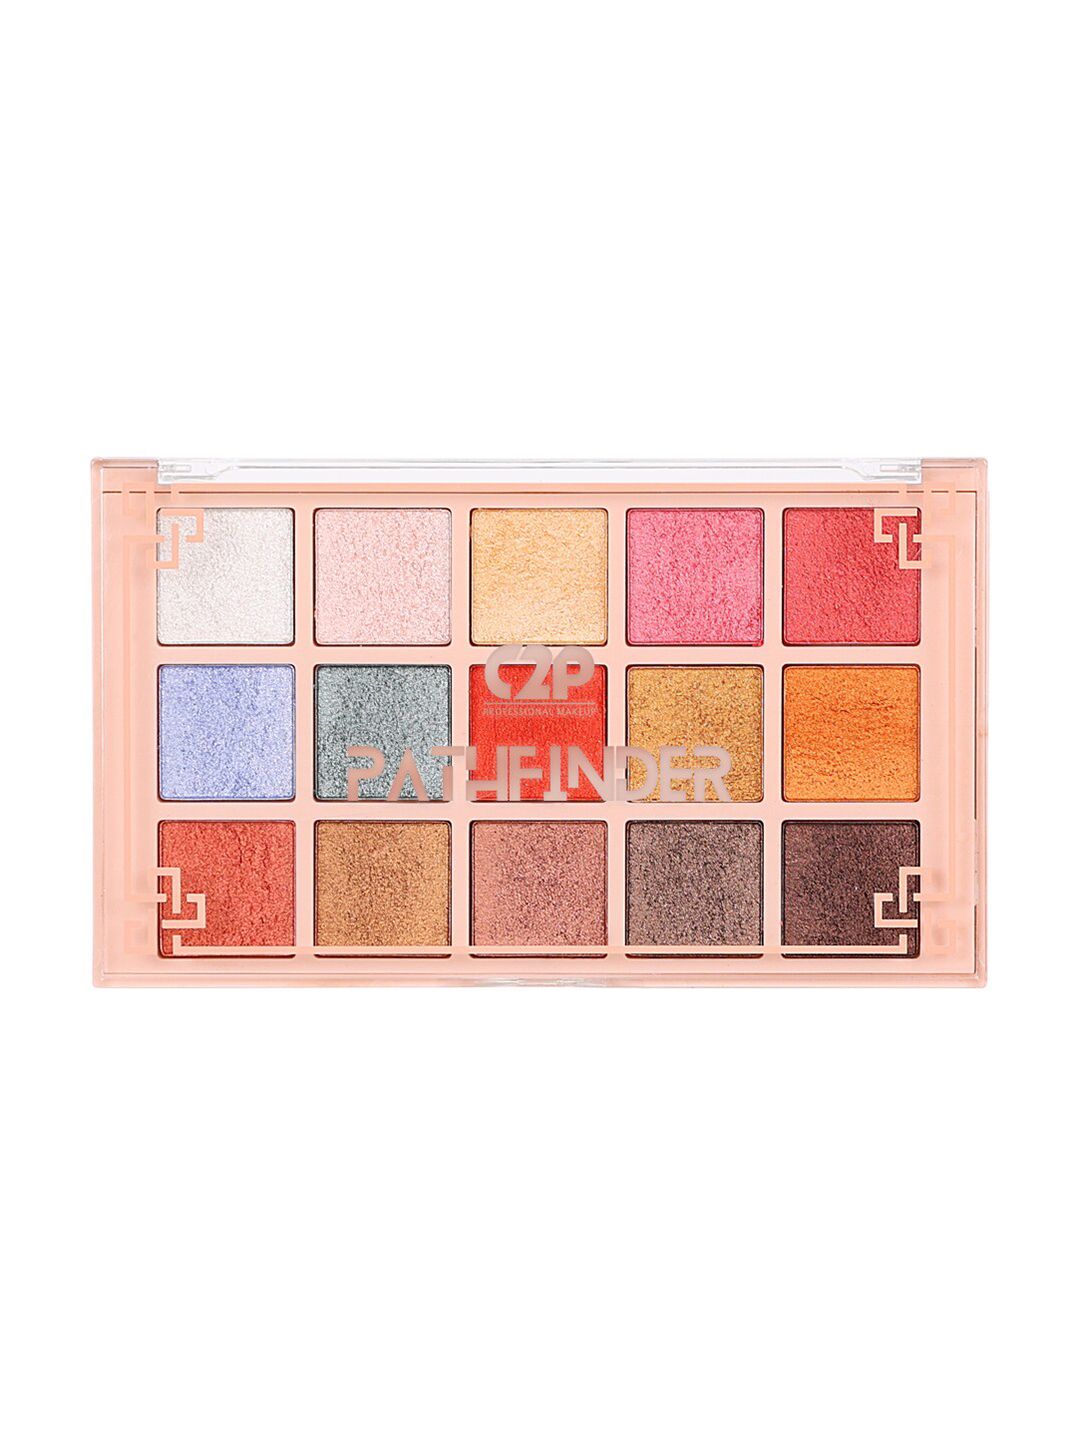 C2P PROFESSIONAL MAKEUP Pathfinder 15 Color Eyeshadow Palette - Summer Coral 02 Price in India